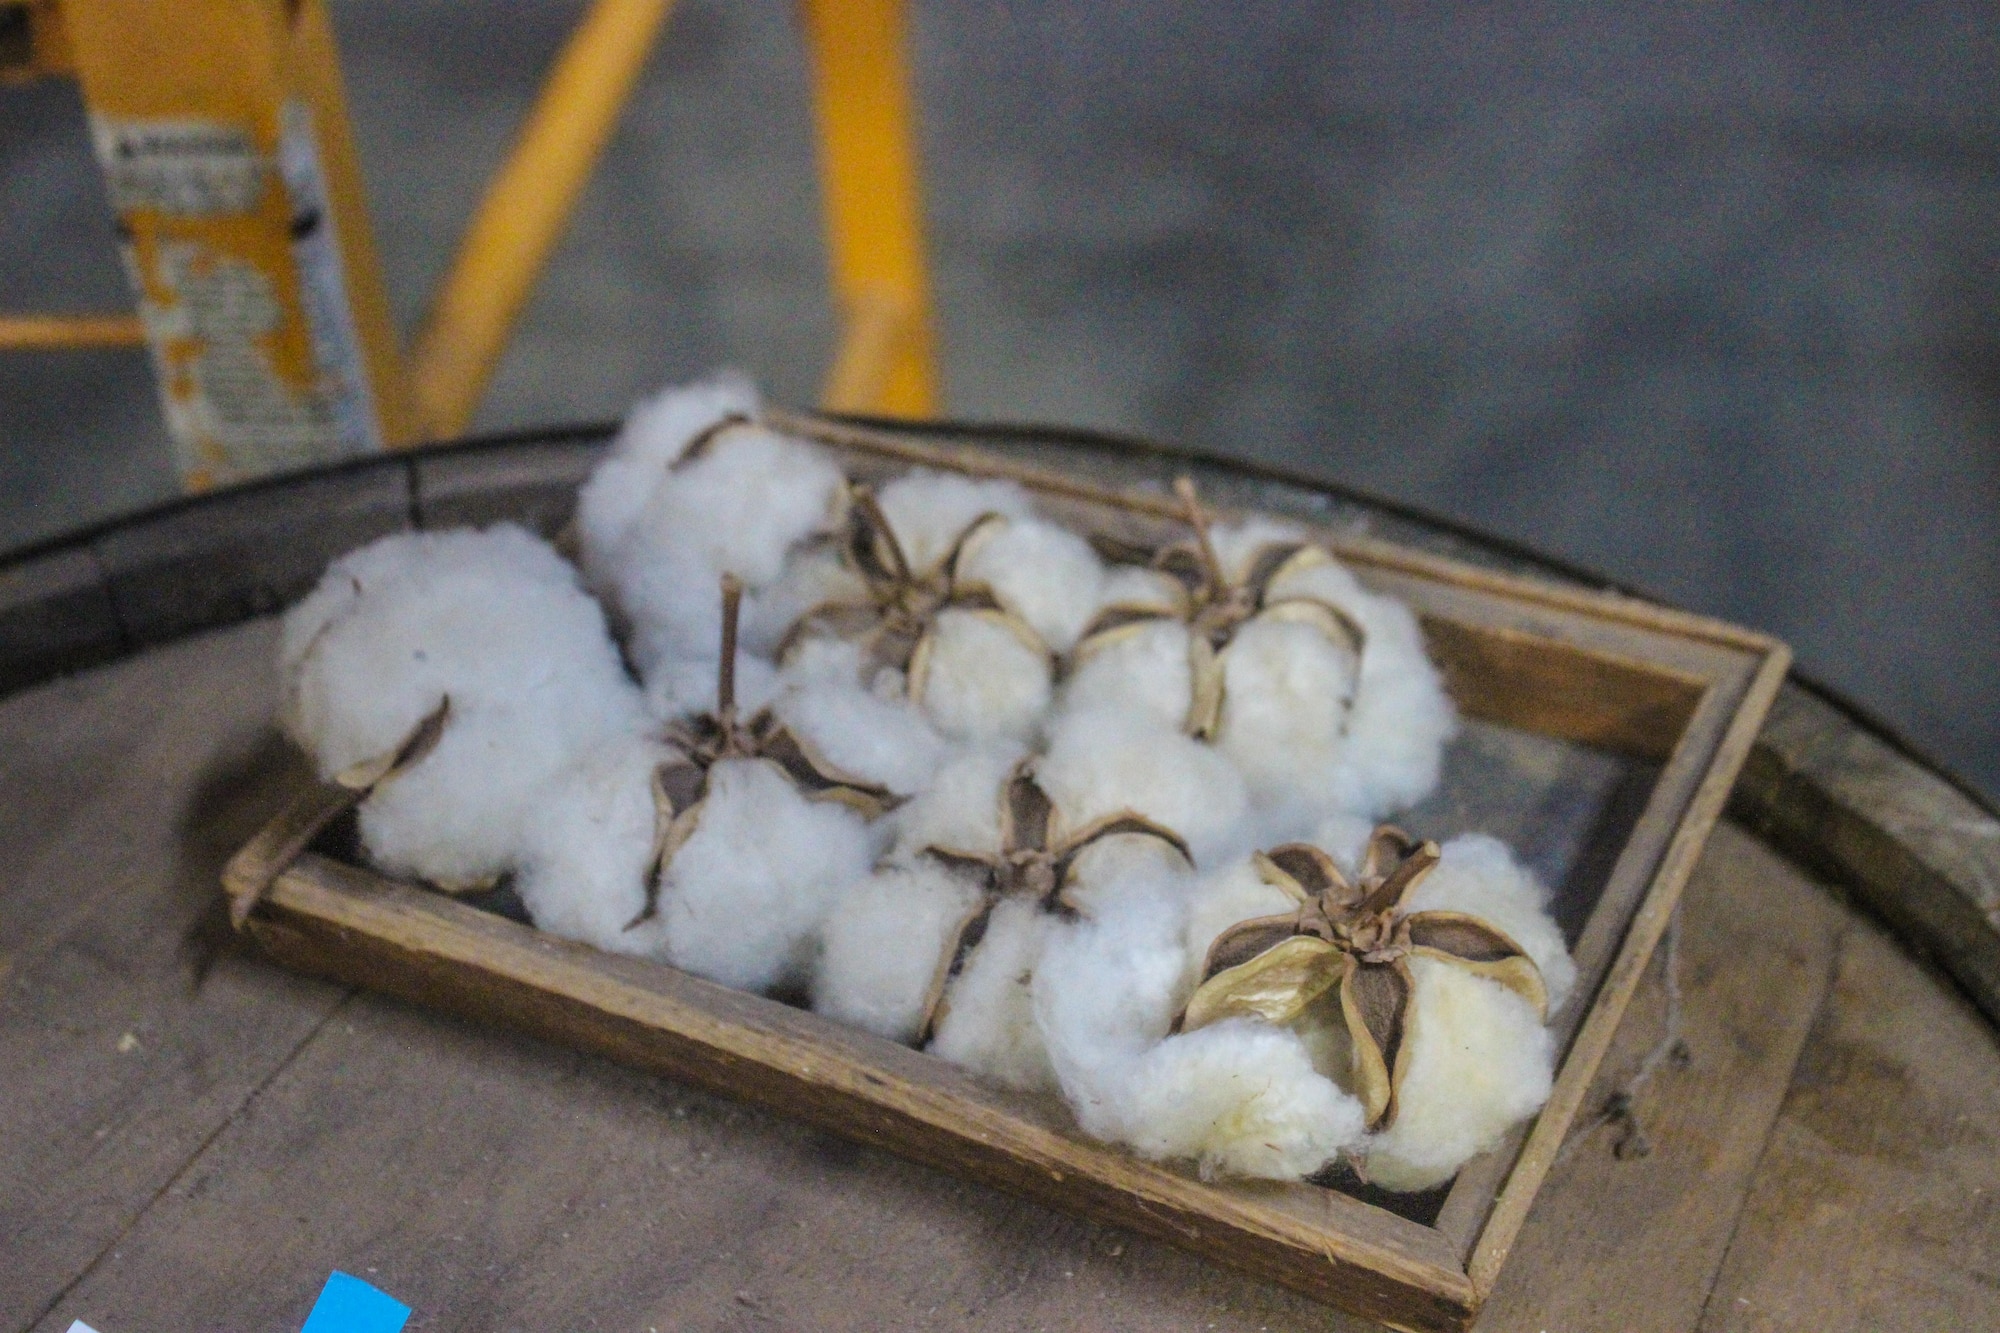 Cotton is in a wooden container